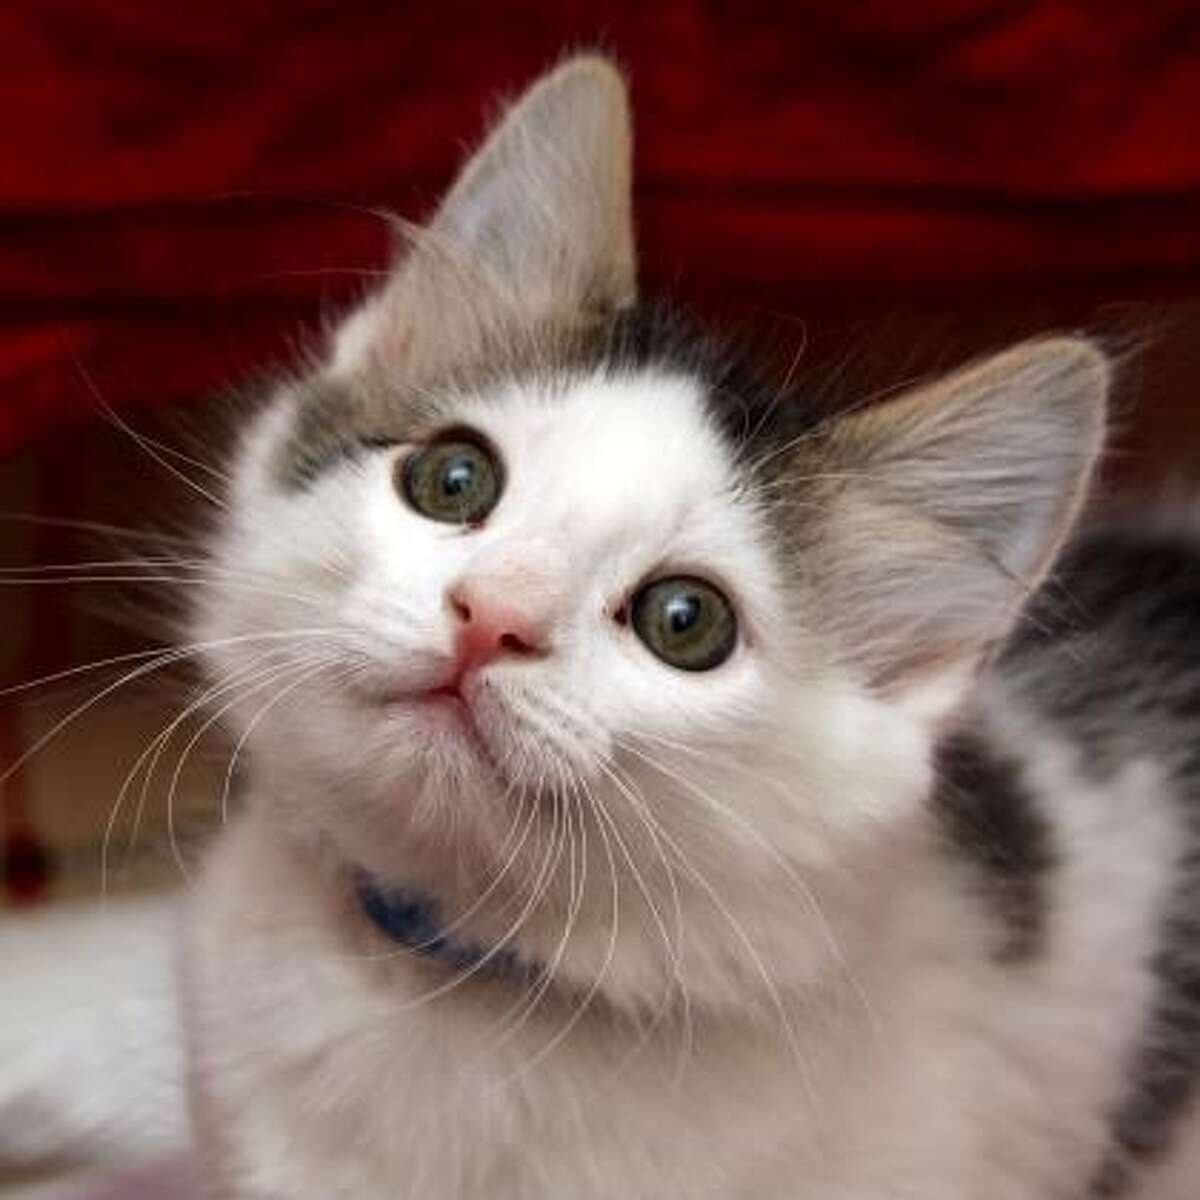 York, male, 3 months old SPCA: I'm a curious kitten looking for adopters who can commit to continuing my education and socialization. I am ready for a home with snuggles and playtime and lots of kitten-love! I am looking forward to some gentle handling and daily play sessions with you.